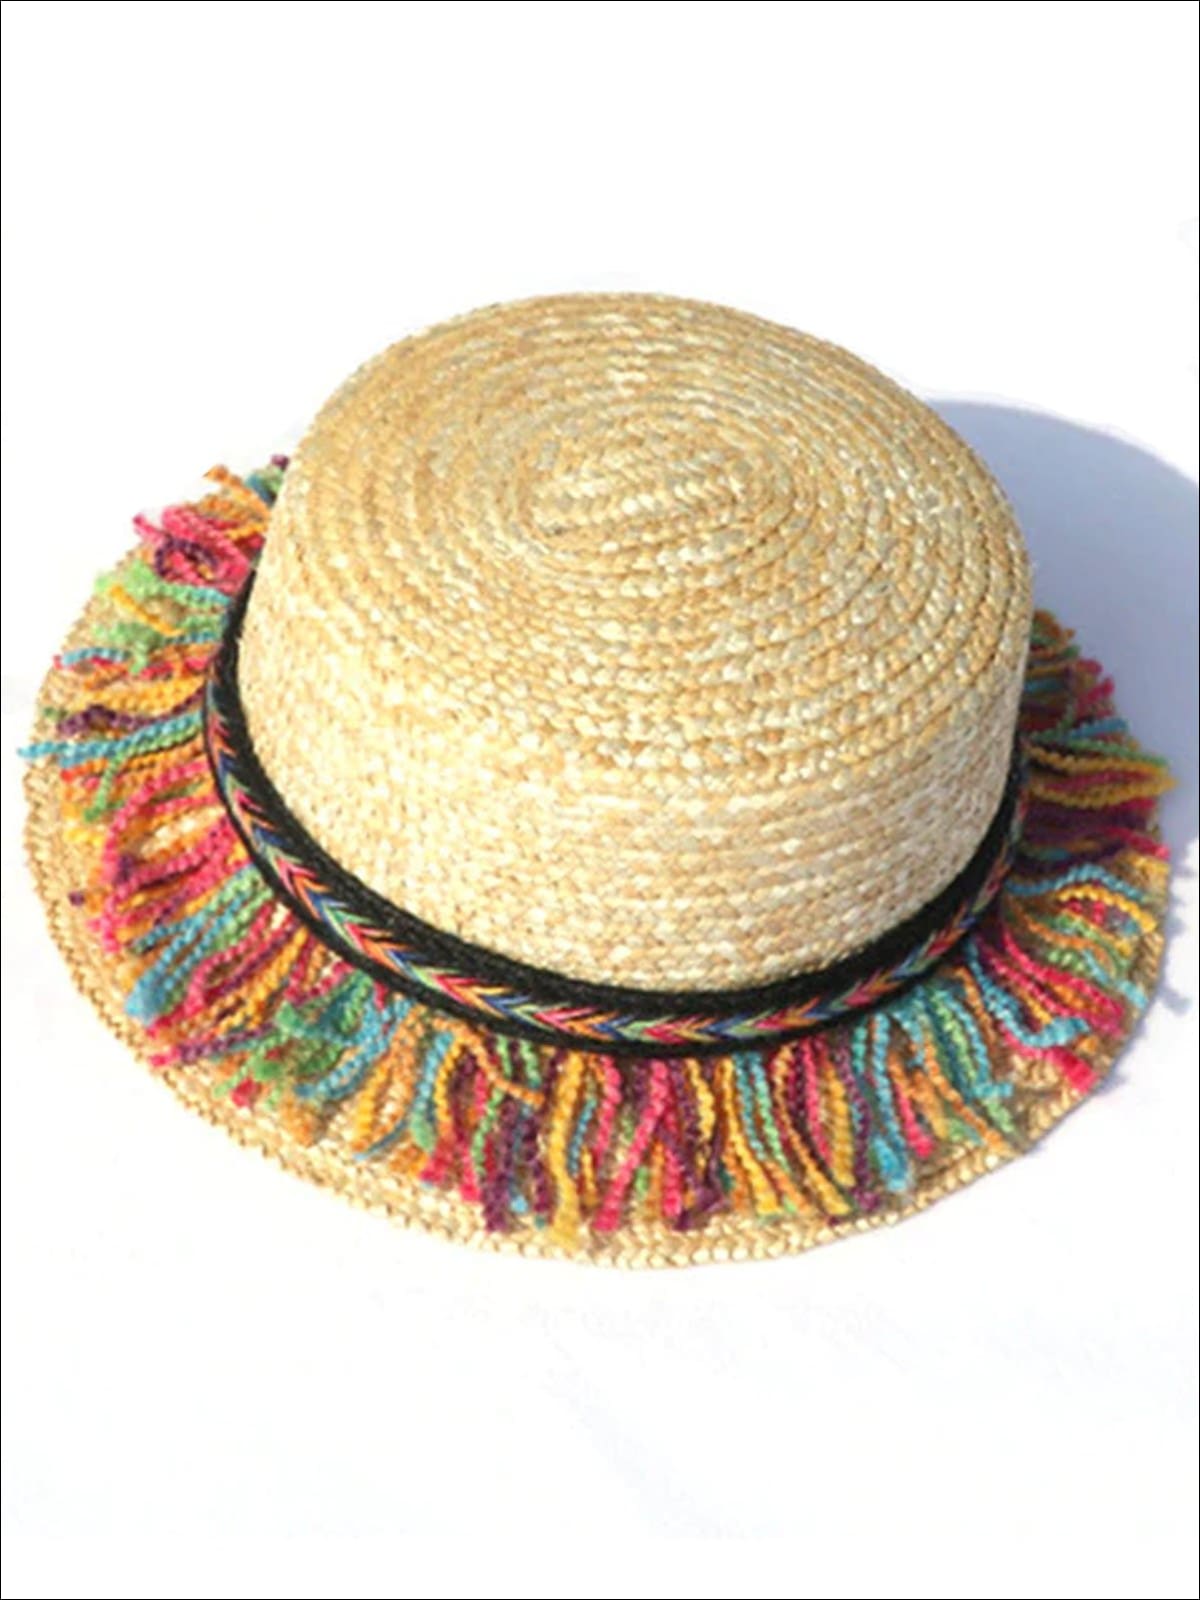 Girls Straw Hat With Rainbow Colored Tassels - Black / One Size - Girls Hats